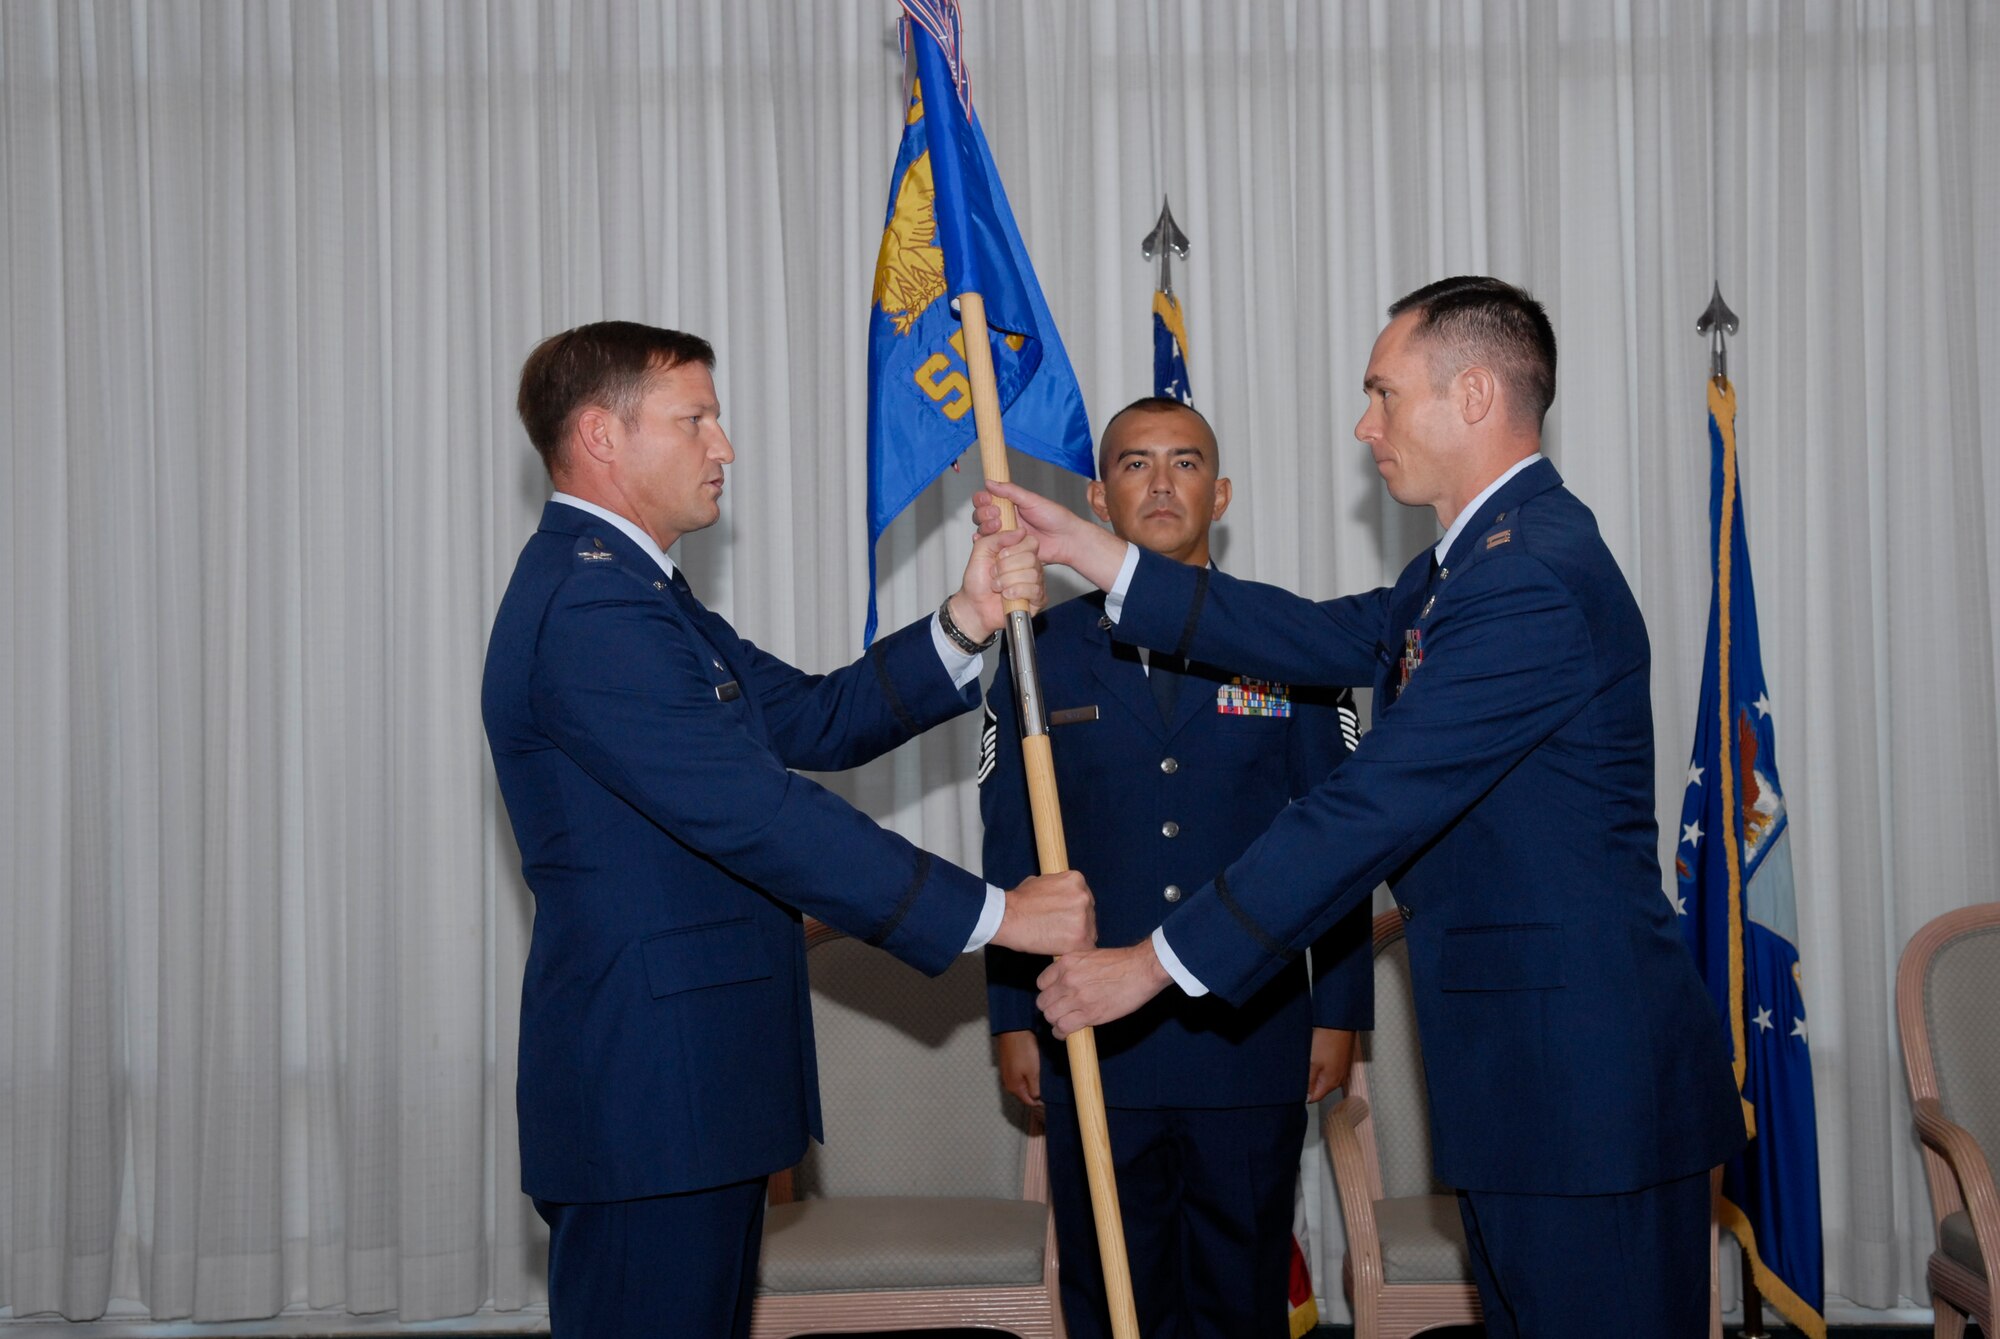 Captain Jeffrey Adams accepts the 325th Security Forces Squadron guidon from Col. Michael Fleck, 325th Mission Support Group commander, during a Change of Command ceremony July 30 at Tyndall. Captain Adams replaces Maj. David Boyd as the new 325th SFS commander. (U.S. Air Force photo/Susan Trahan)